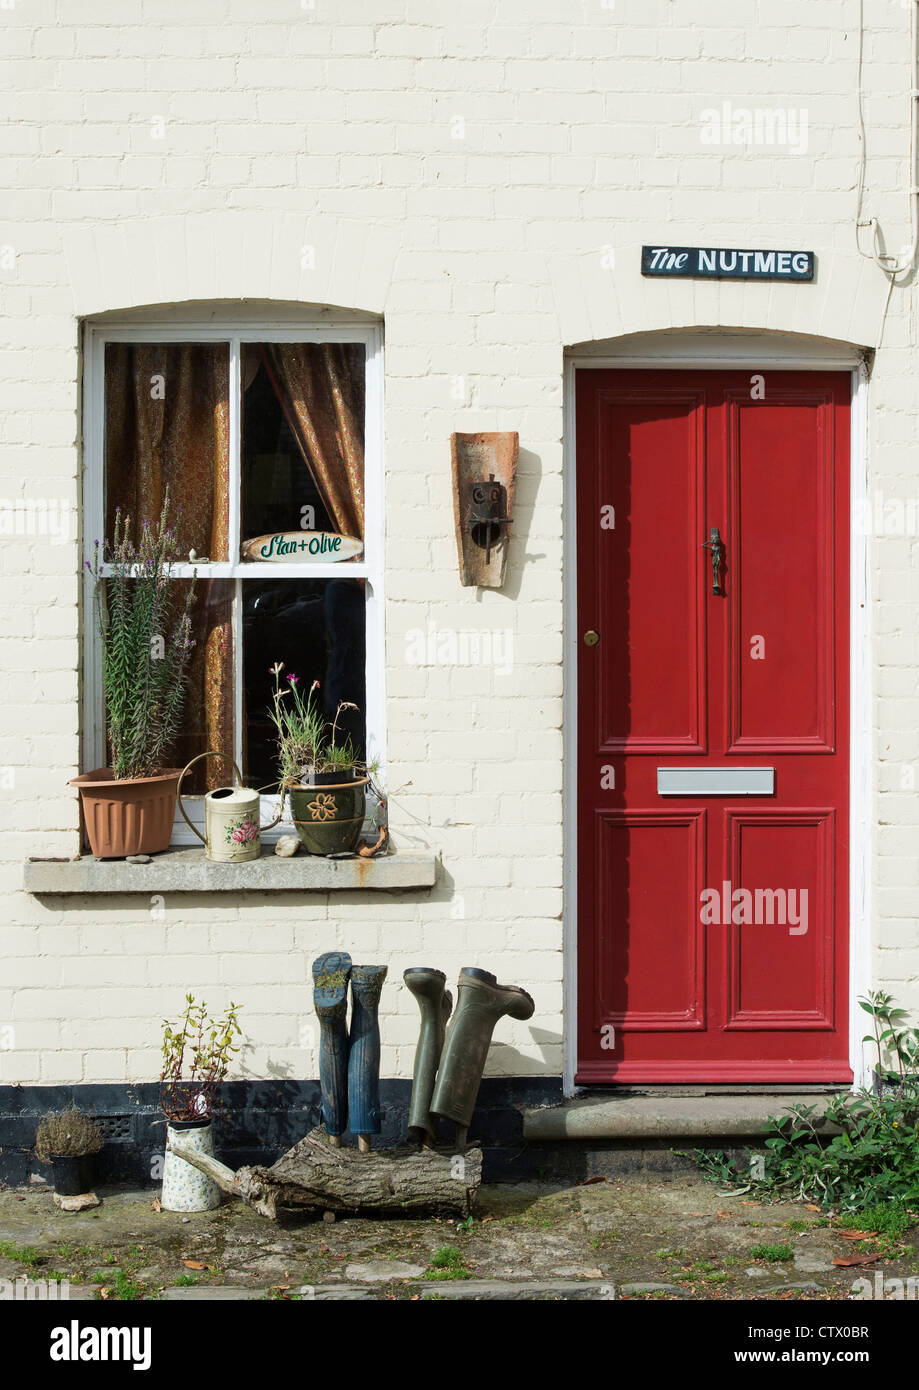 Quirky english colourful red door and house name. The Nutmeg. Eardisland. Herefordshire, England Stock Photo